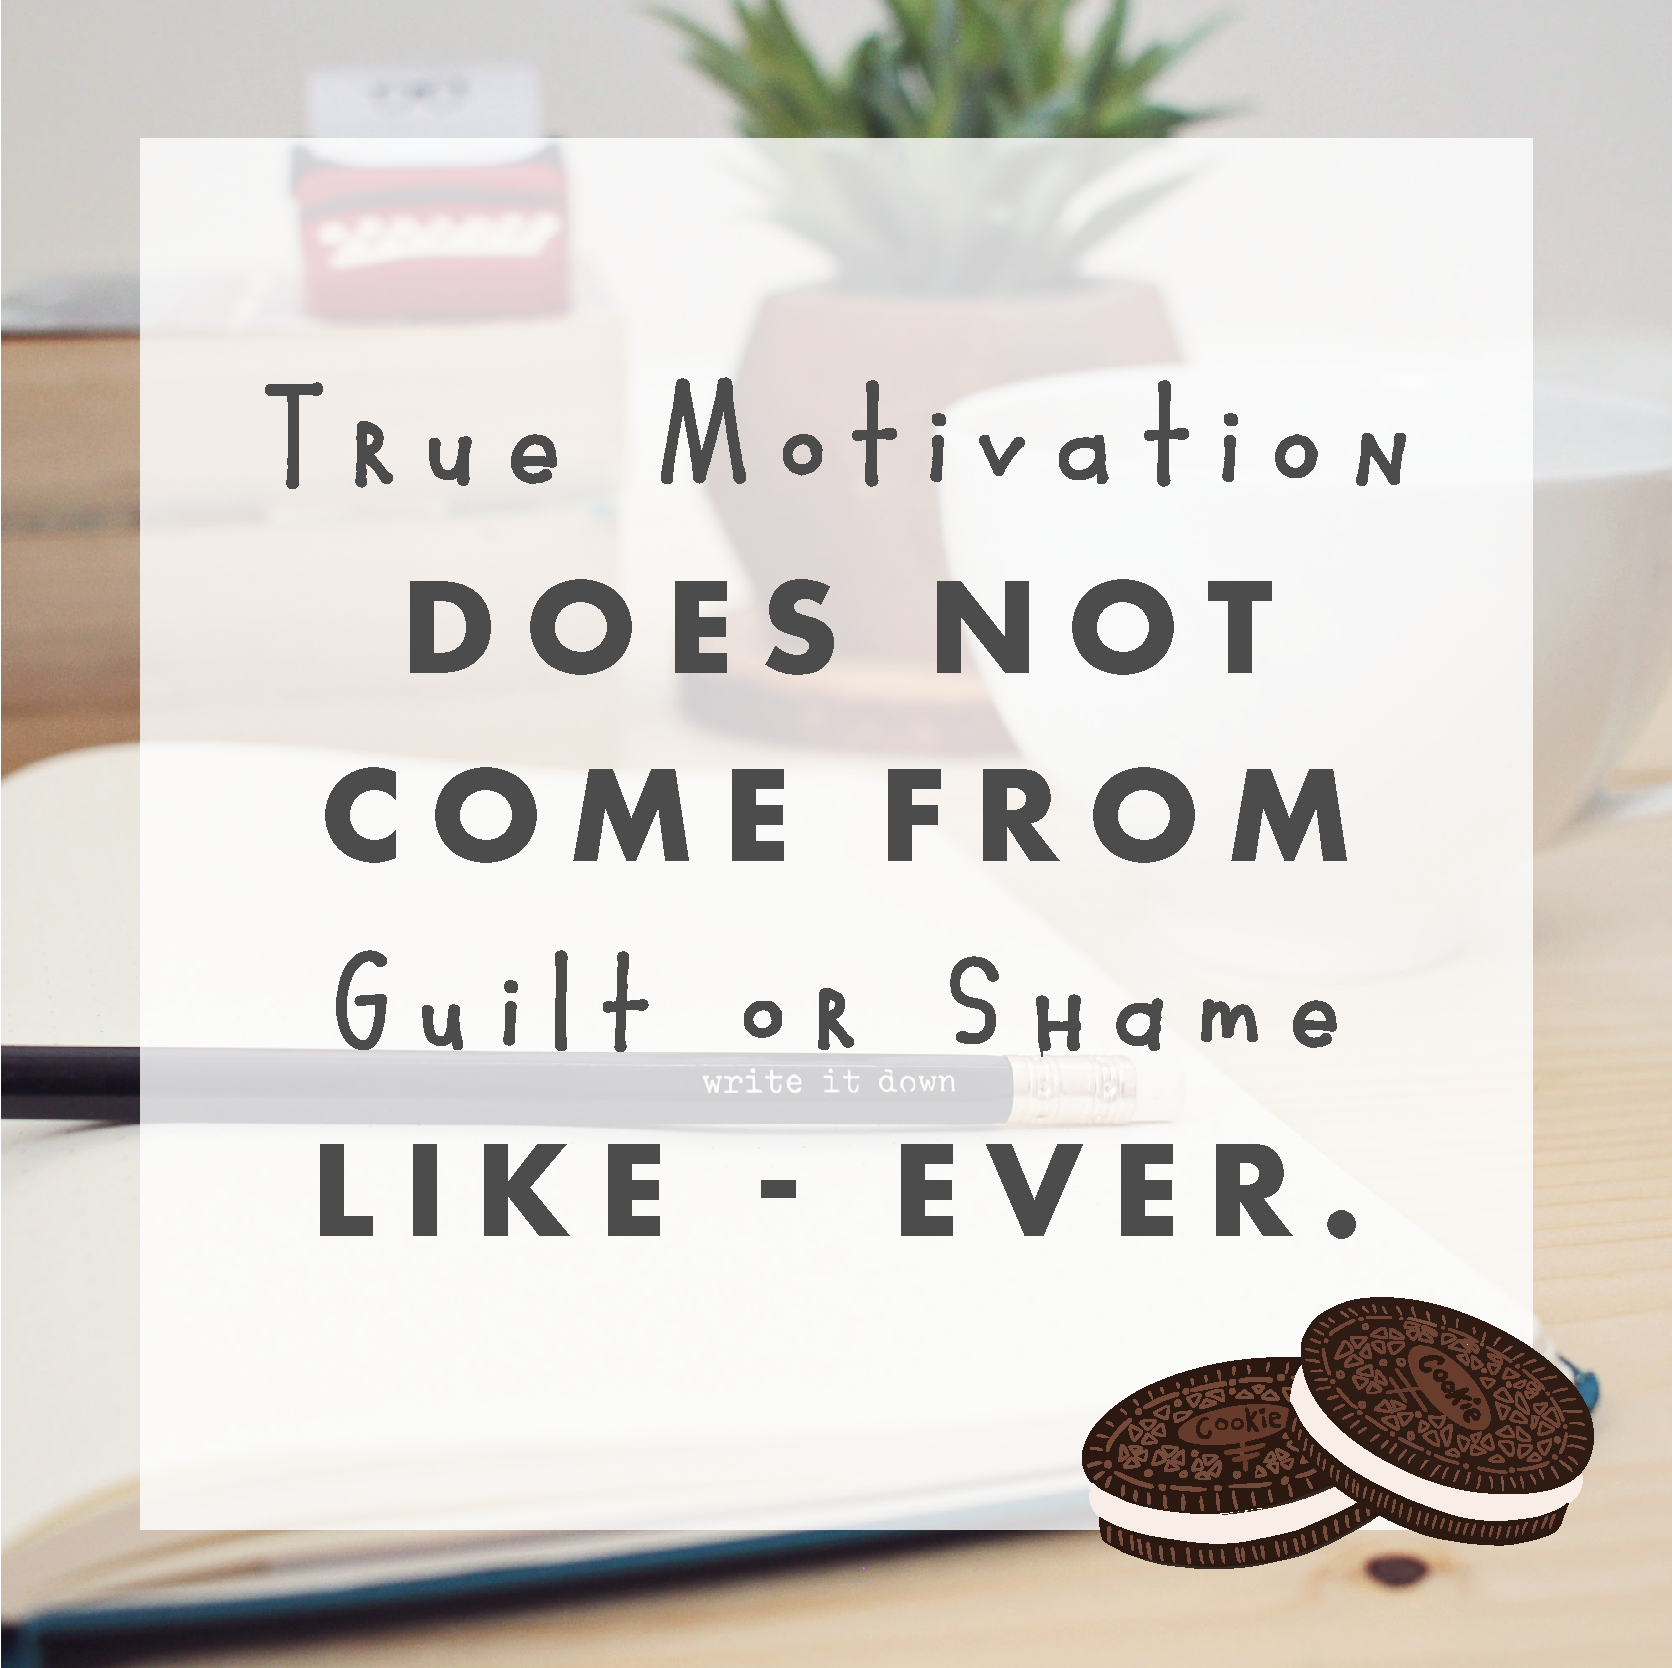 True Motivation does not come from guilt or shame - like...ever.